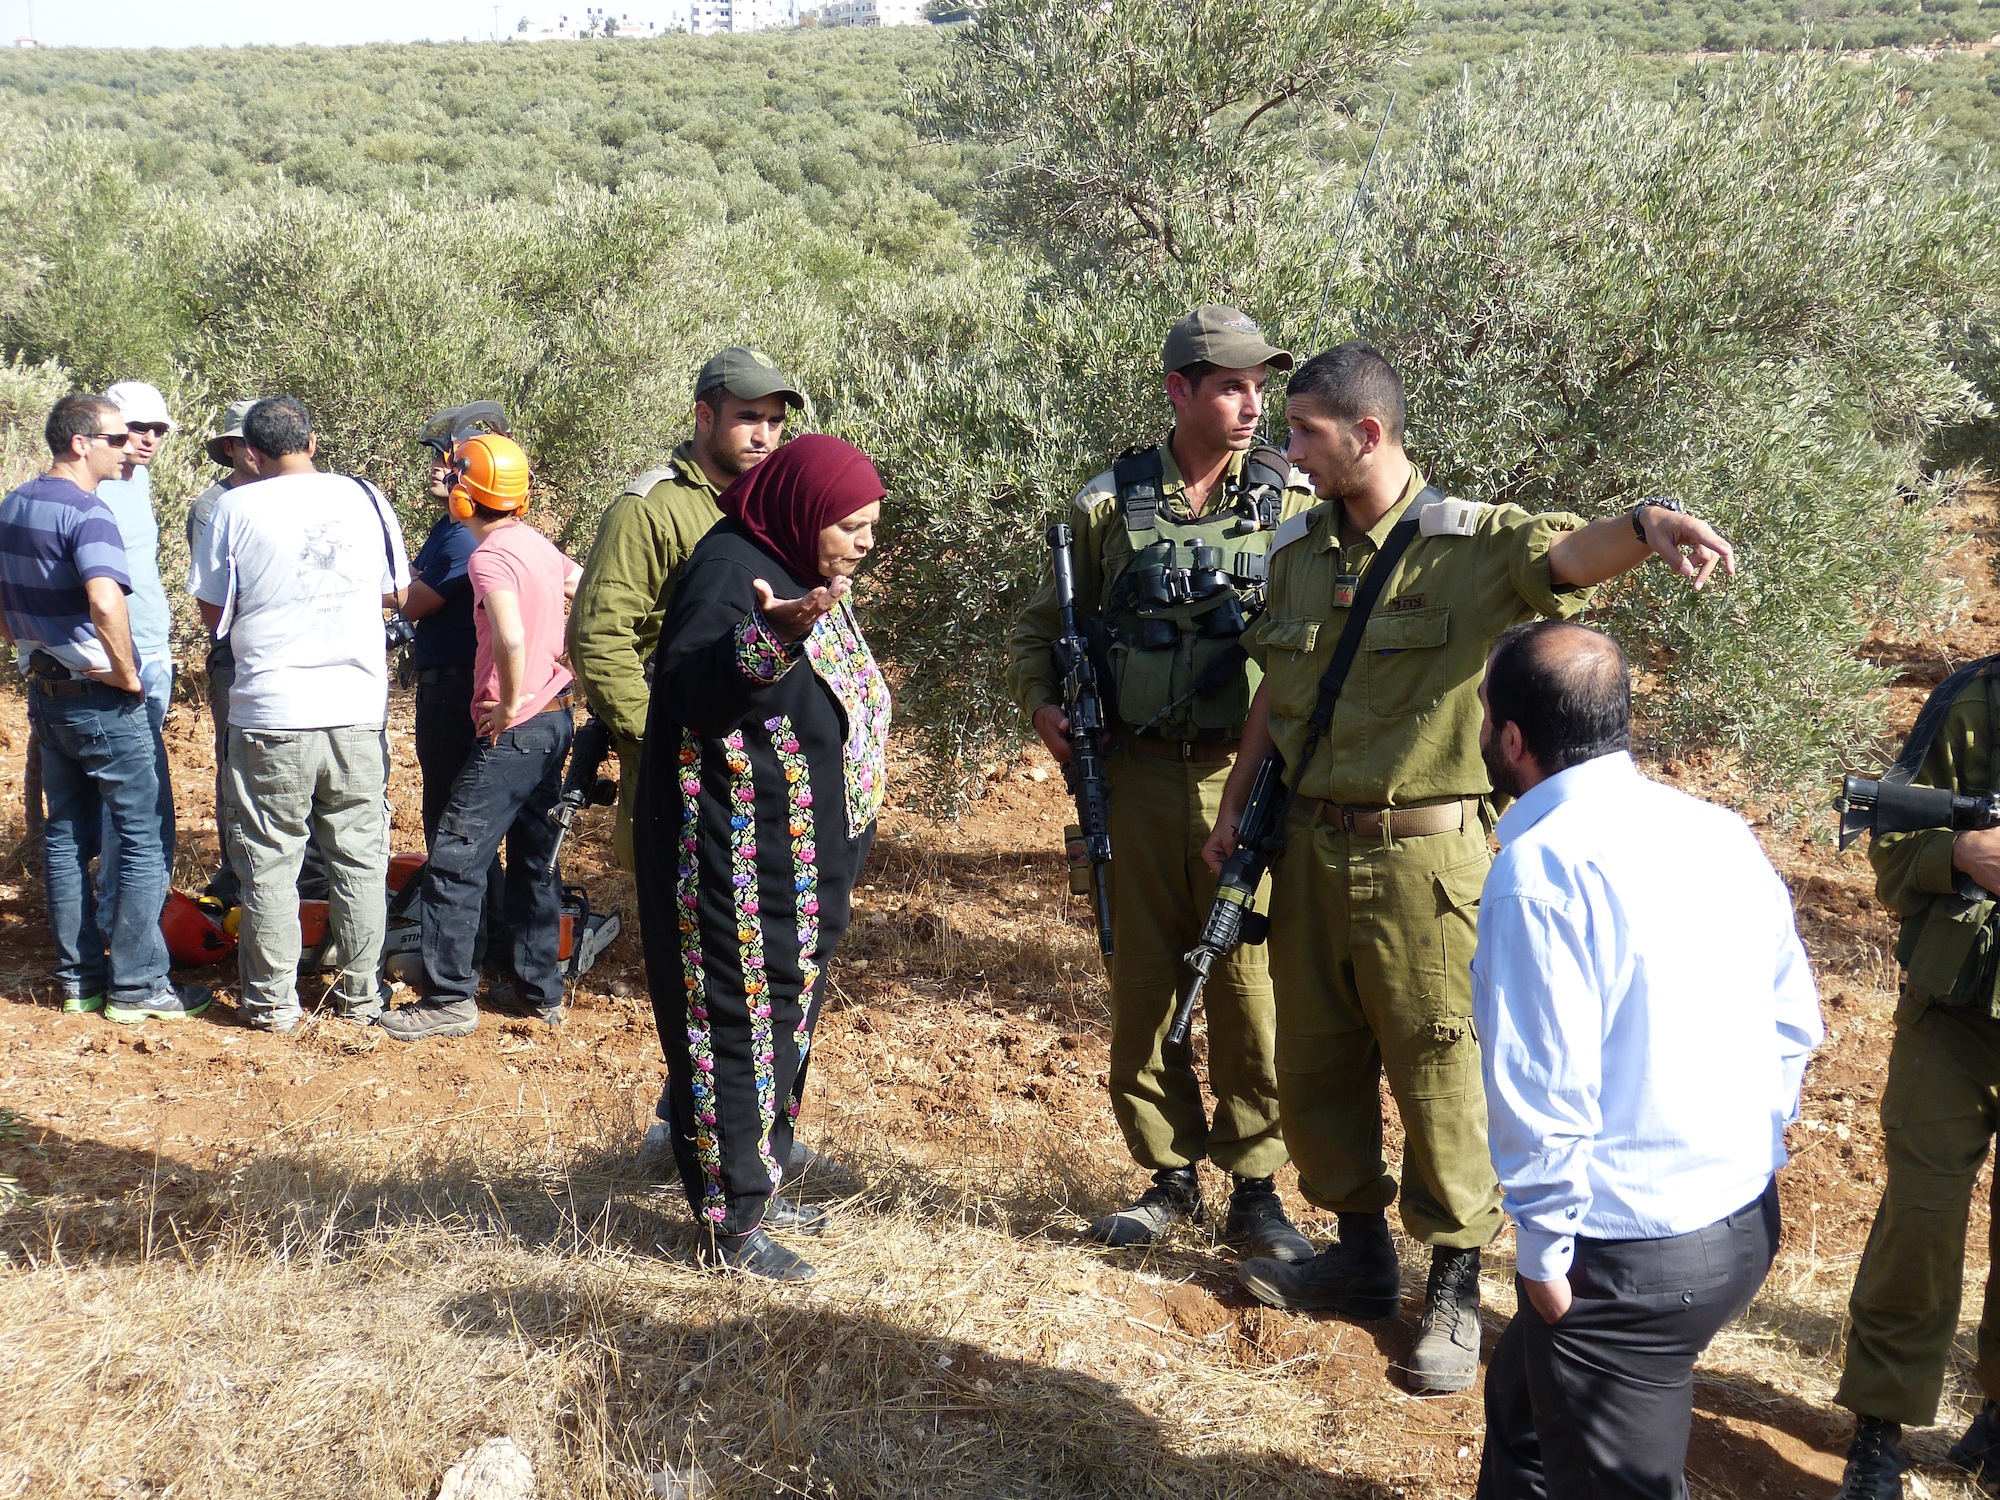 25 Nov 2013 Palestinian woman pleading with Israeli soldiers as trees are cut down_A.Morgan 